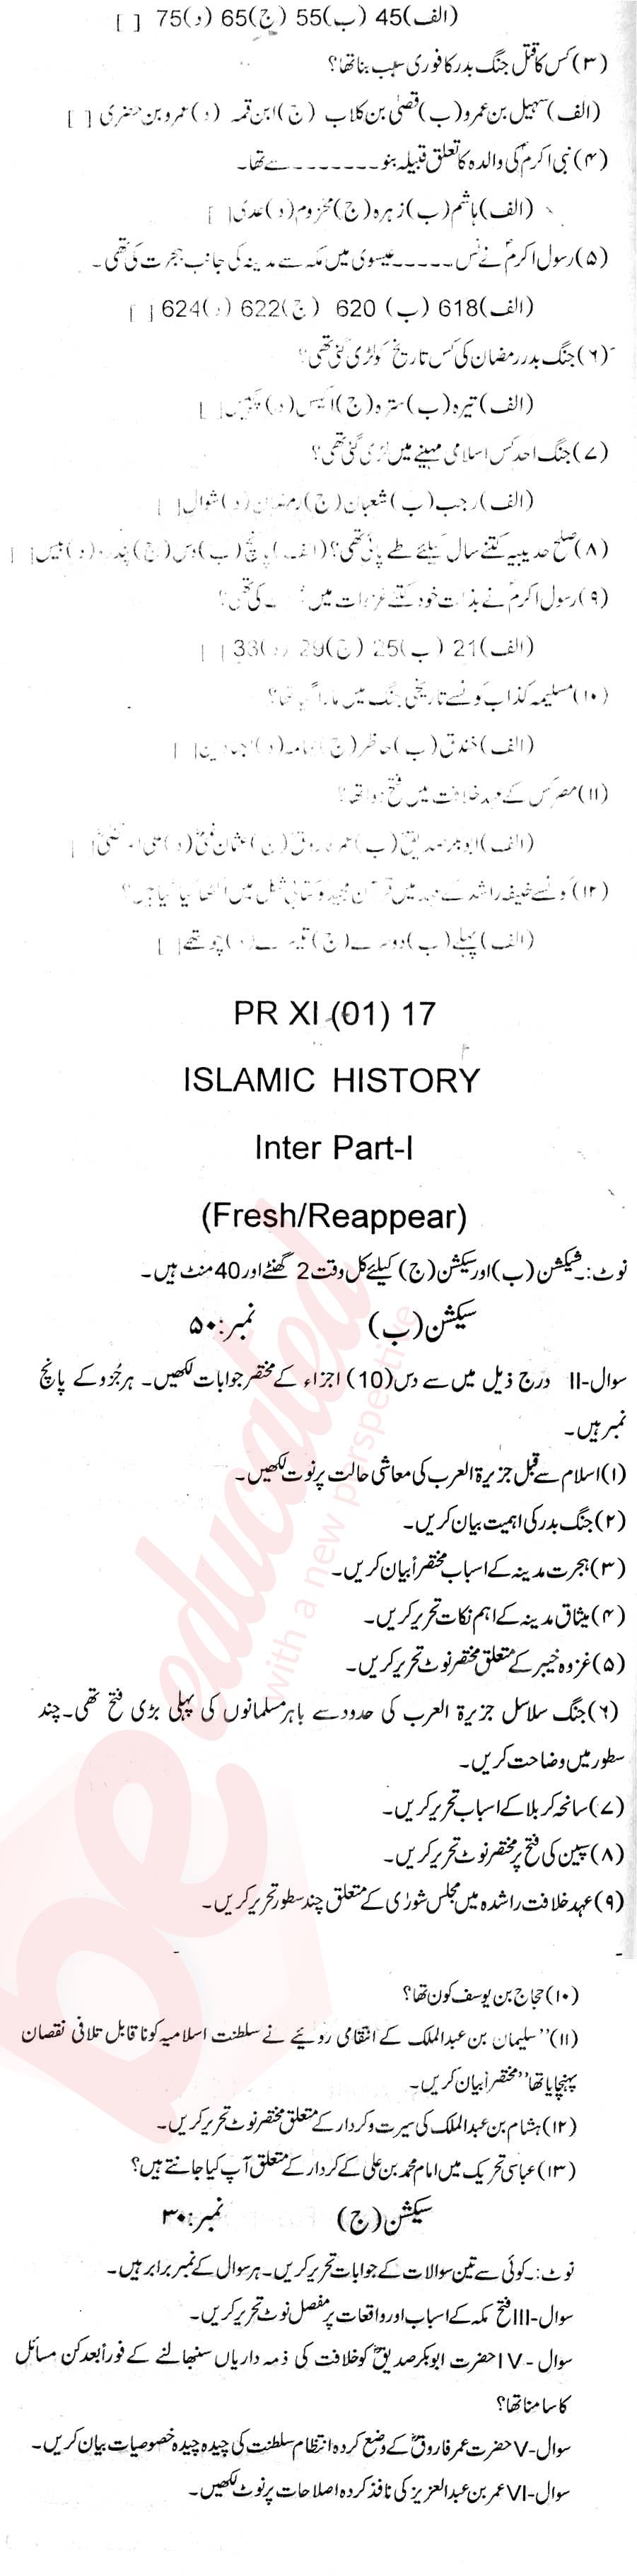 Islamic History FA Part 1 Past Paper Group 1 BISE Swat 2016